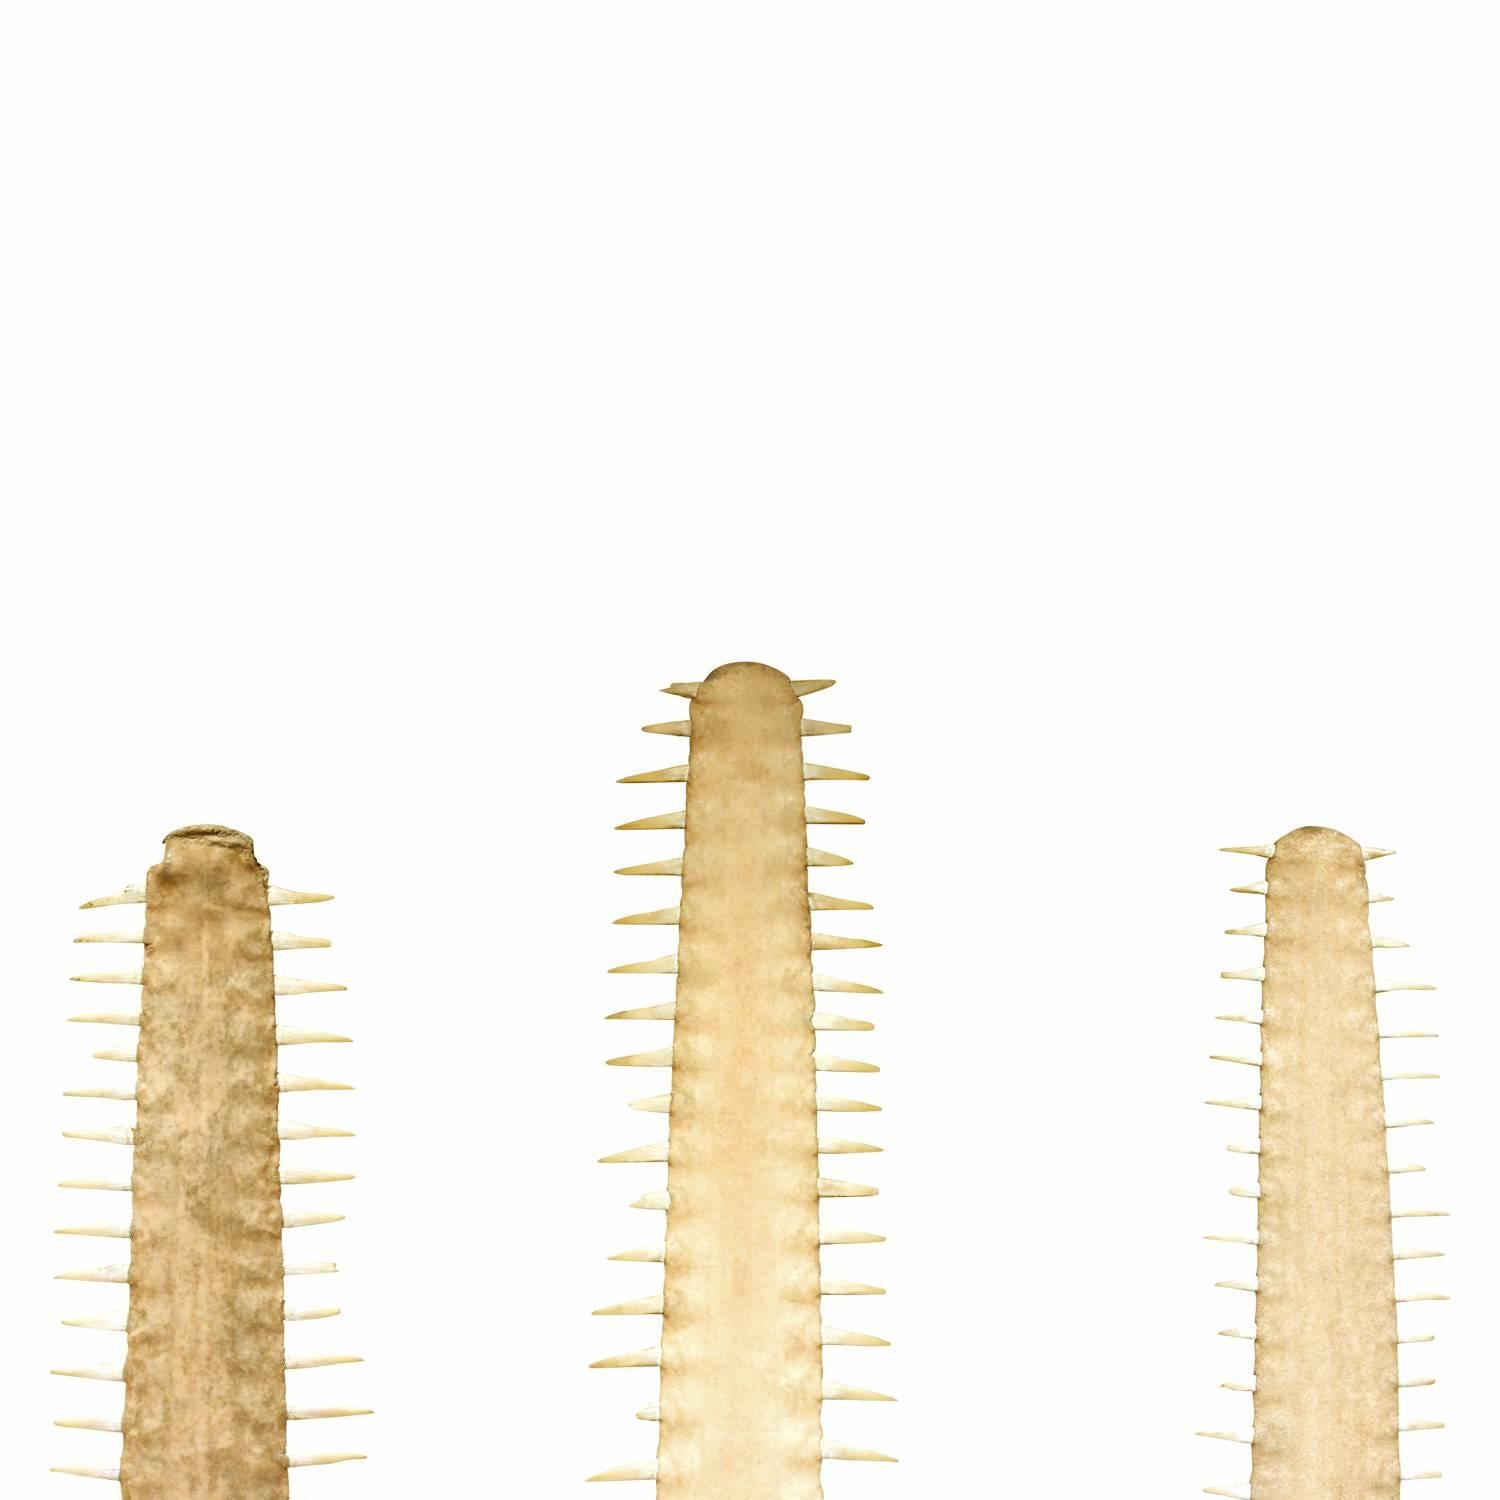 Impressive set of three large sawfish bills mounted in nickel bases, American, 1970s.
Measures: Heights are 56.5, 52.5 and 52 inches.
  